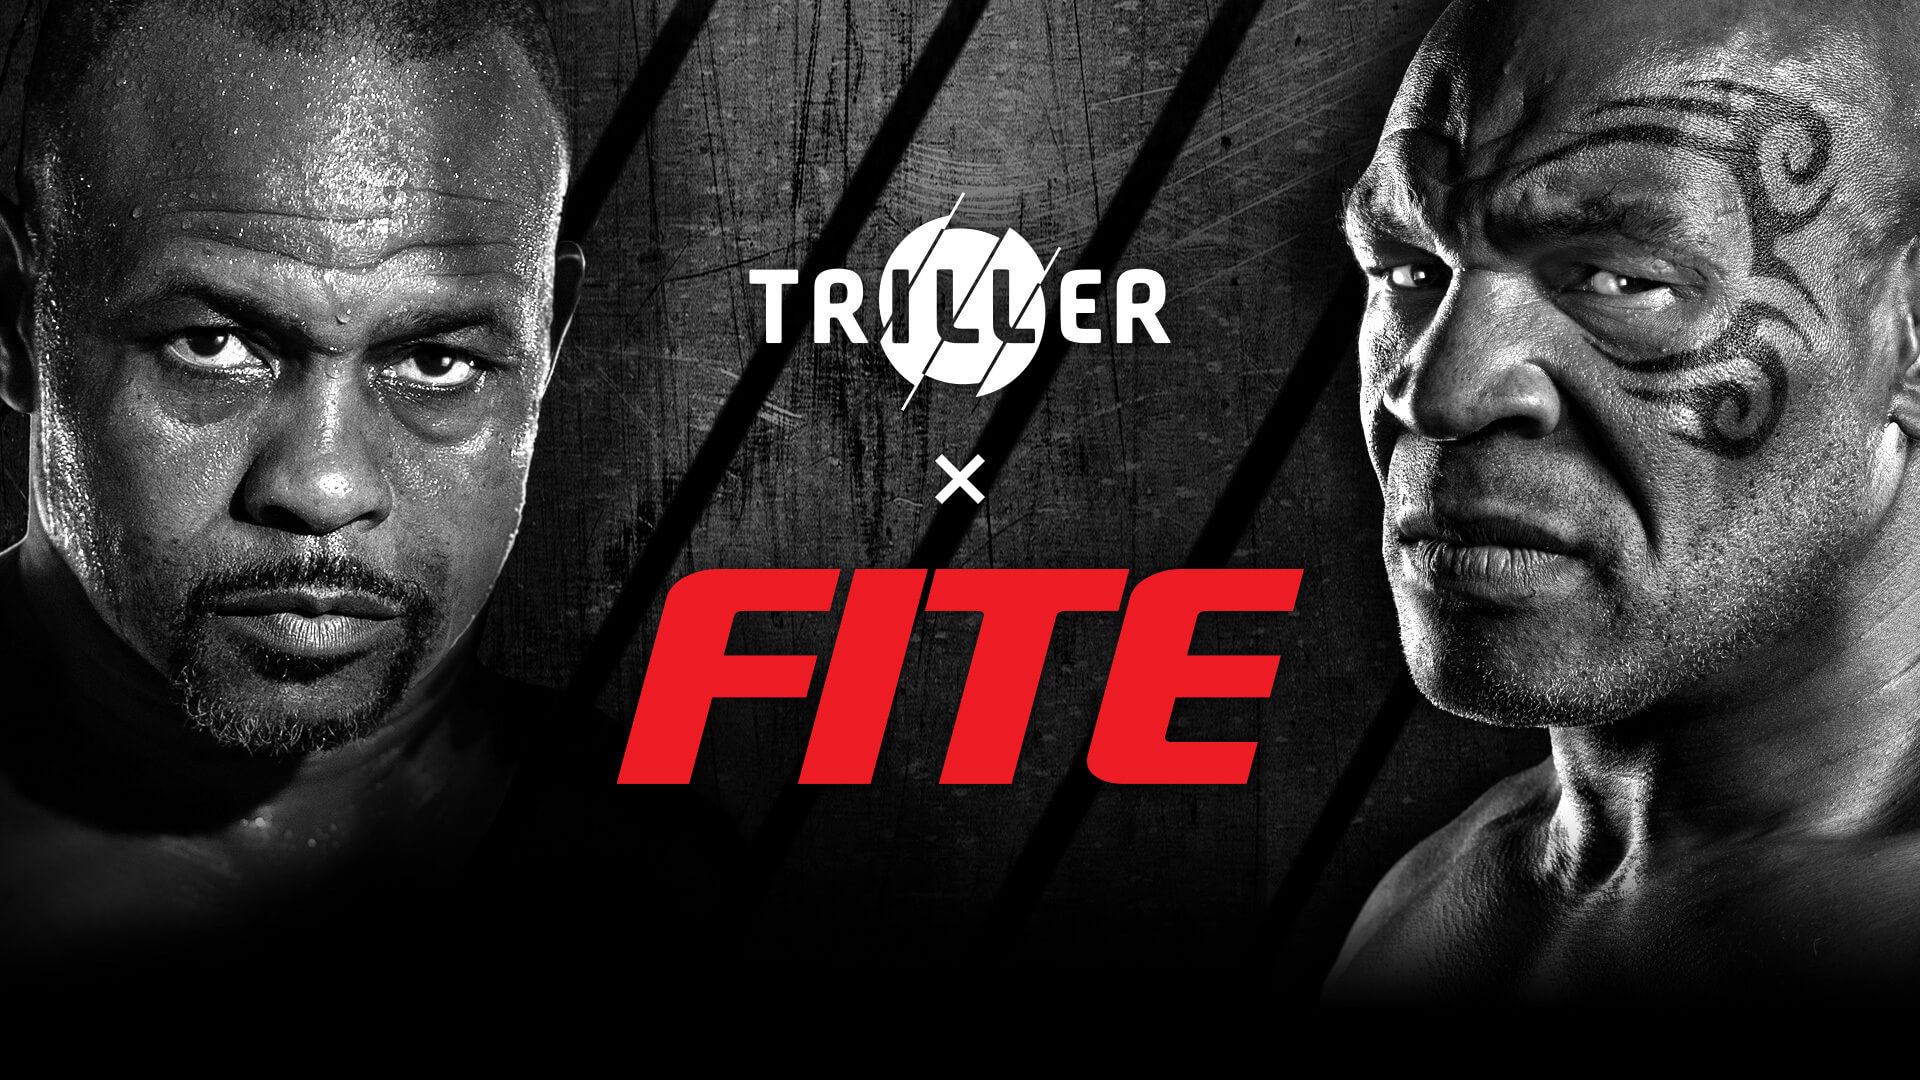 TysonOnTriller.com platform is powered by FITE, which scored the exclusive digital rights for the U.S. and Canada; Buy the event on all FITE platforms for $49.99